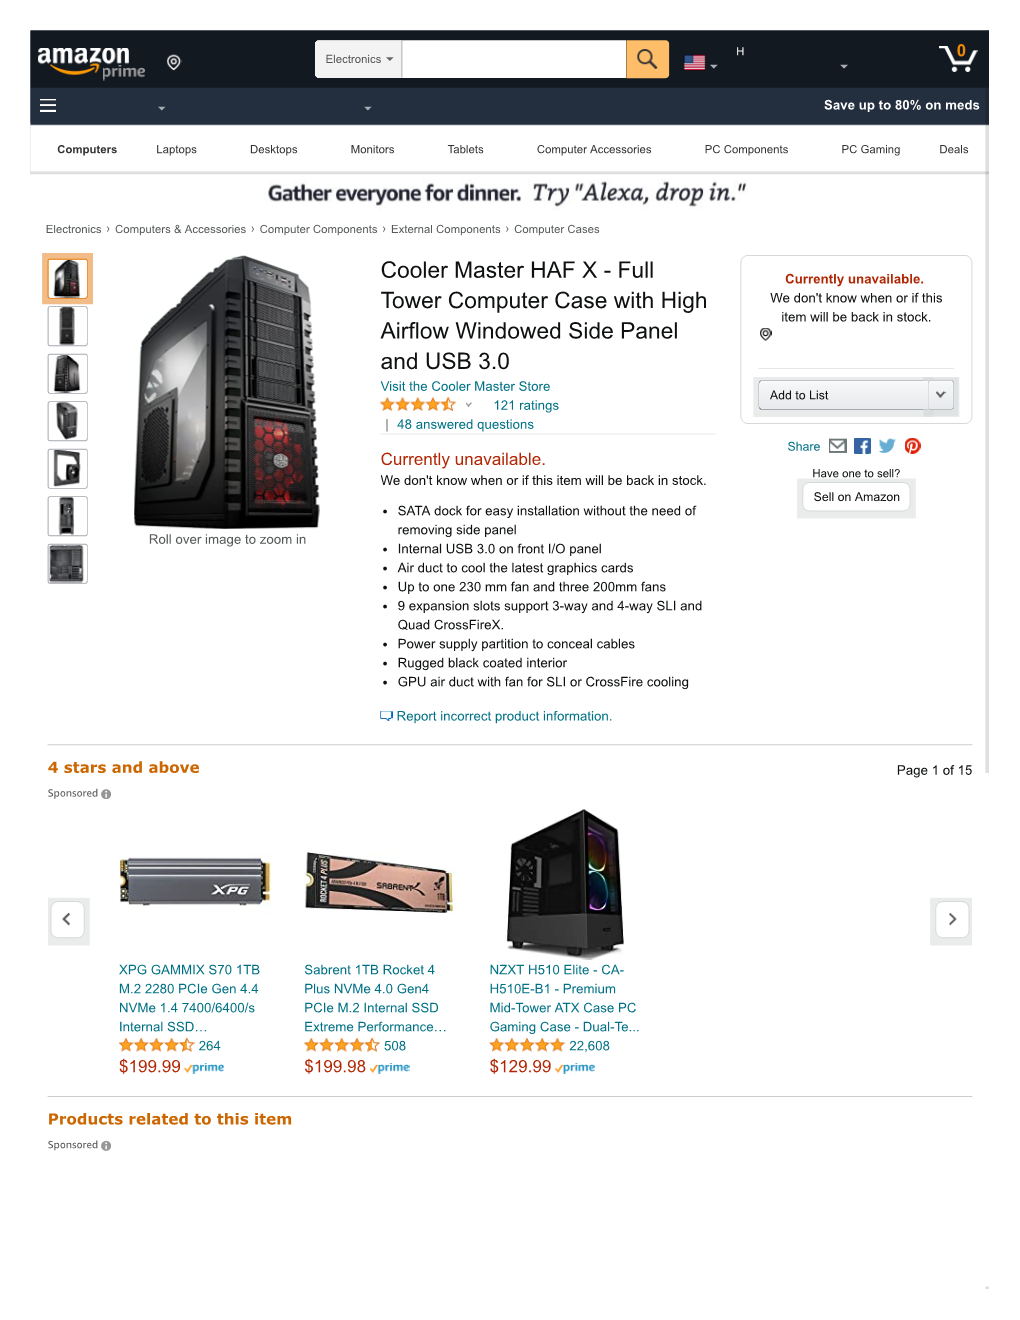 Cooler Master HAF X - Full Currently Unavailable